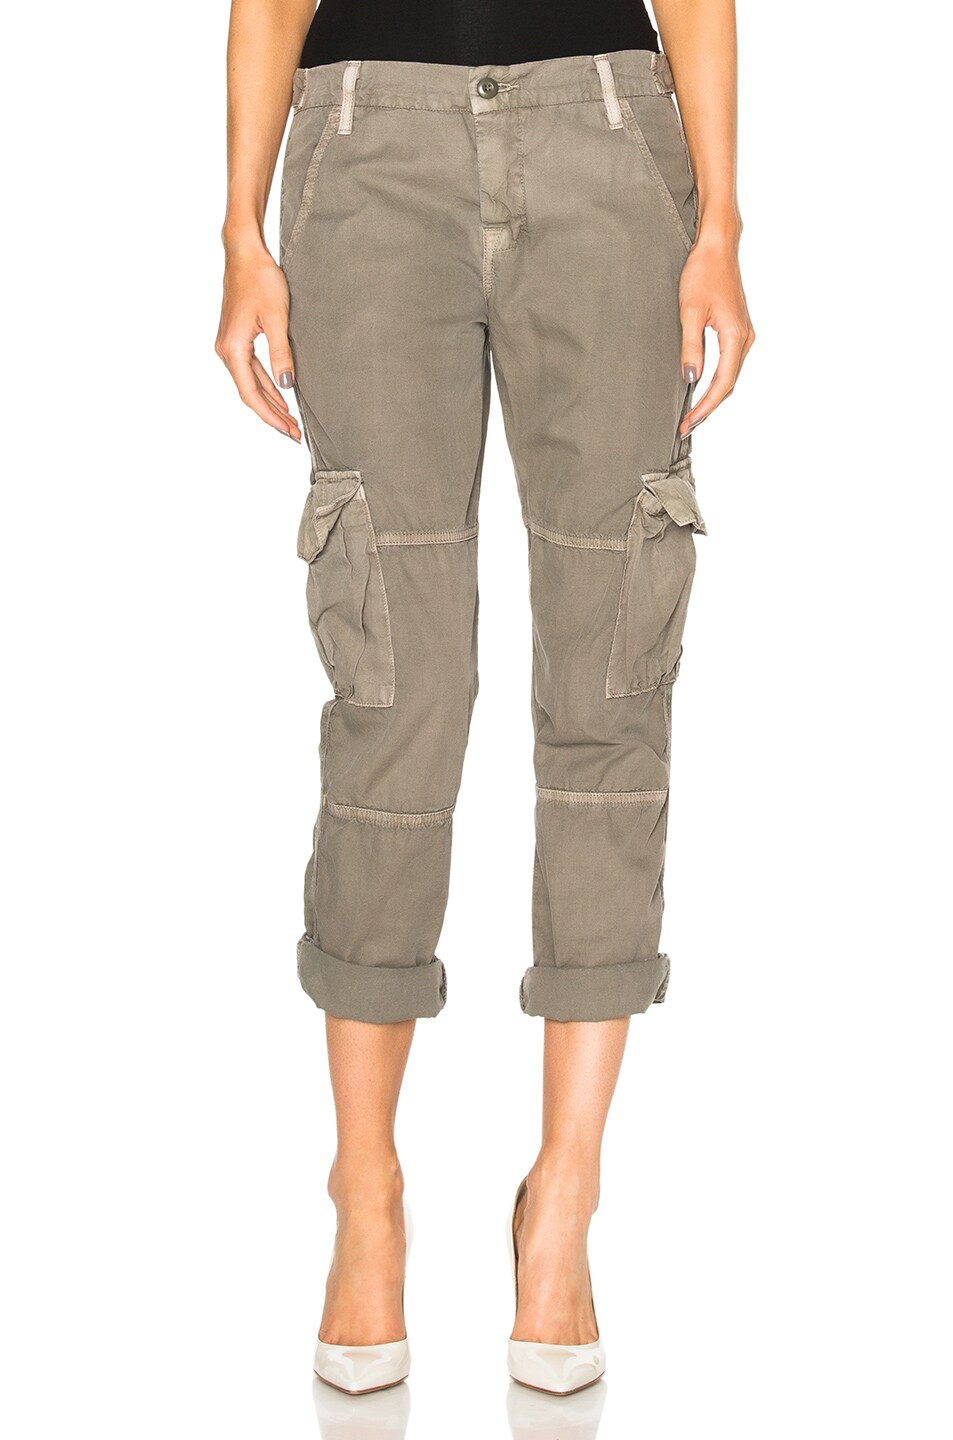 Image 1 of NSF All Day NSF Basquiat Pants in Pigment Cargo